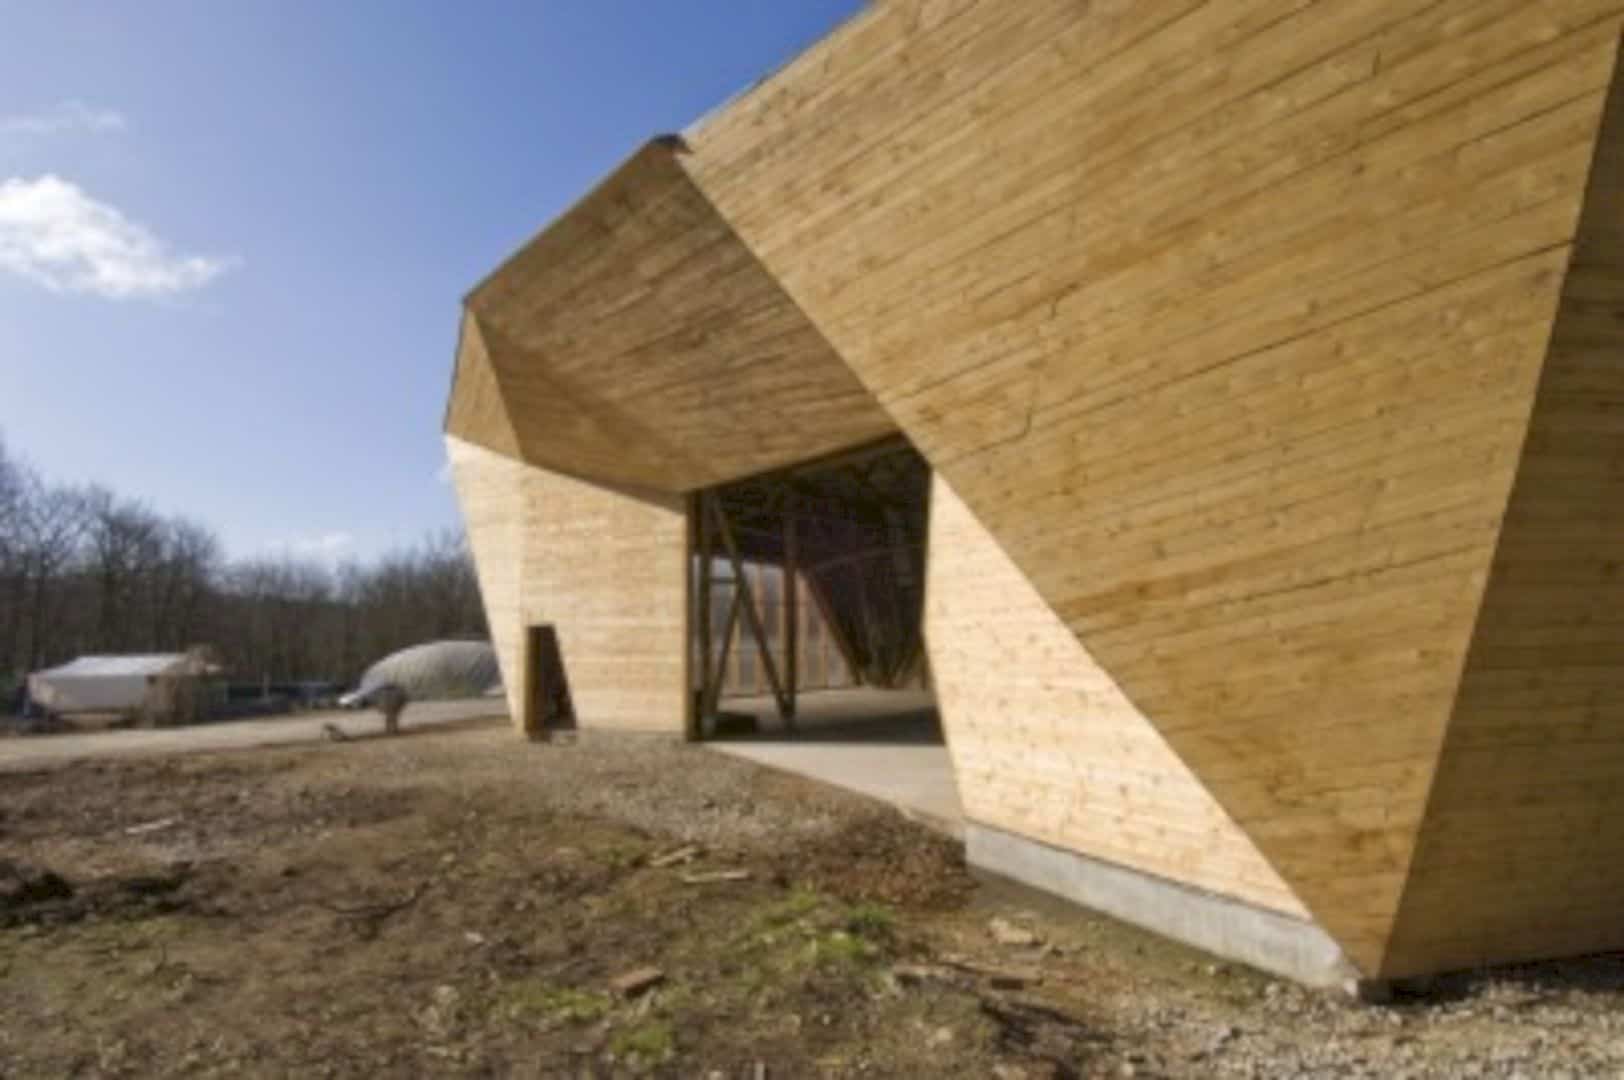 Hooke Park Big Shed A New Sheltered Workspace For Research Into Architectural Systems 1